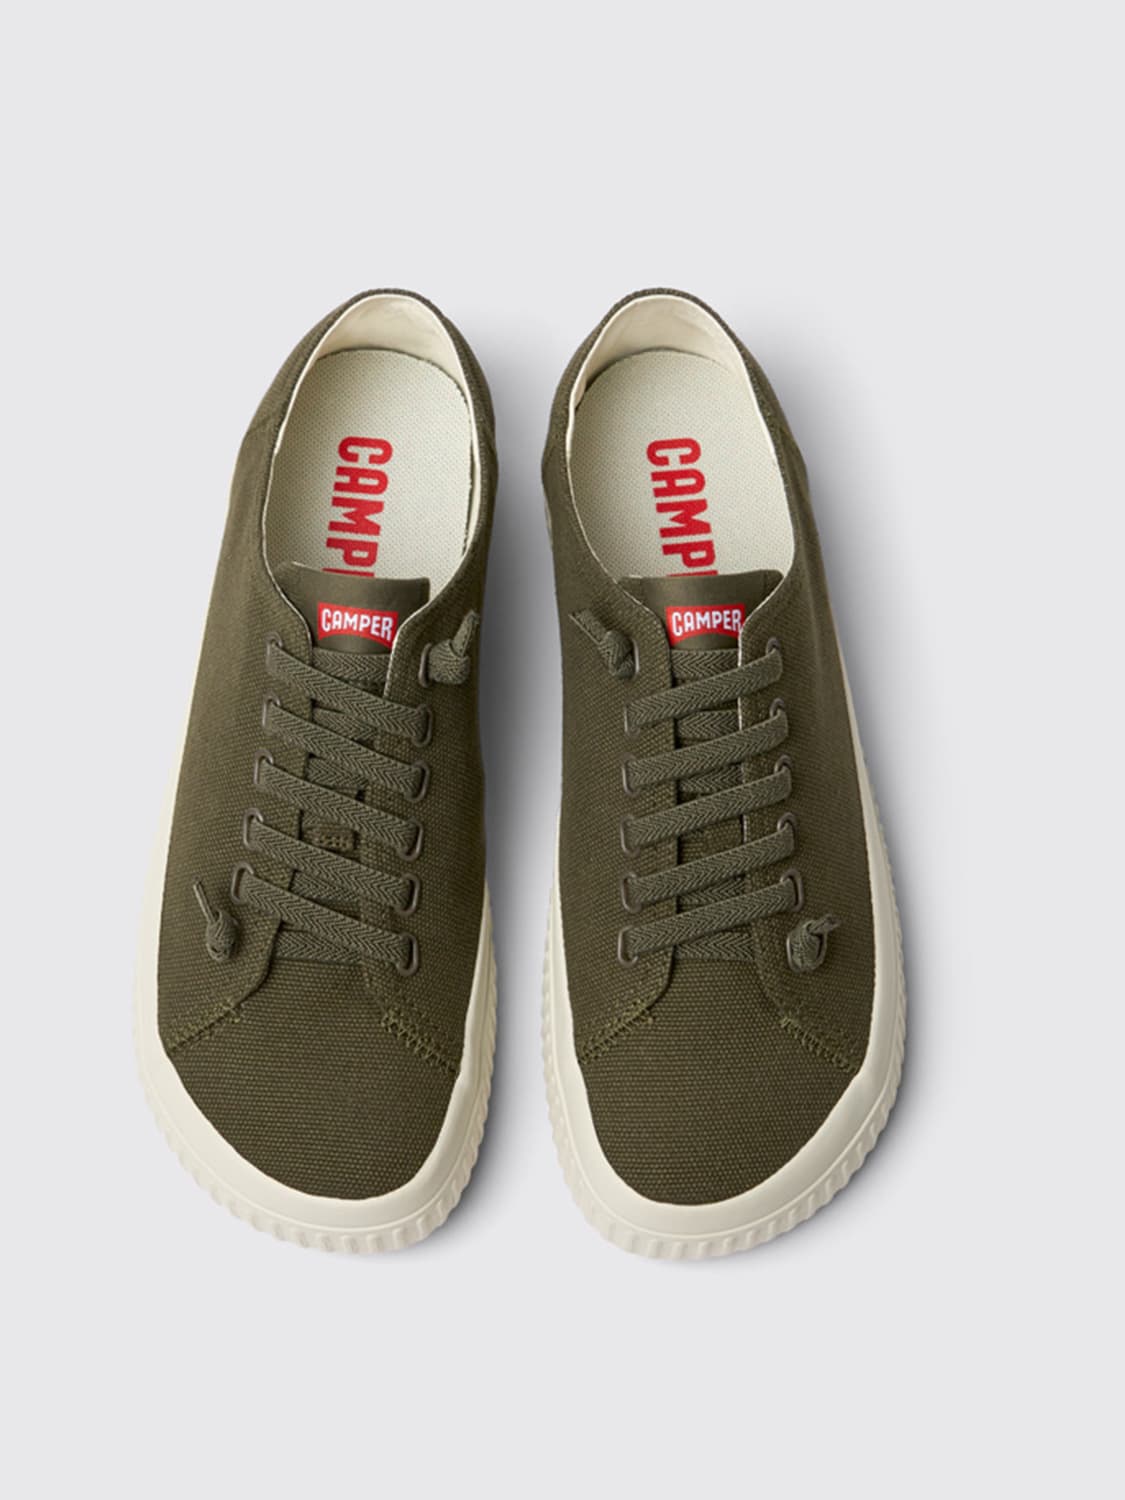 Peu Green Sneakers for Men - Autumn/Winter collection - Camper USA